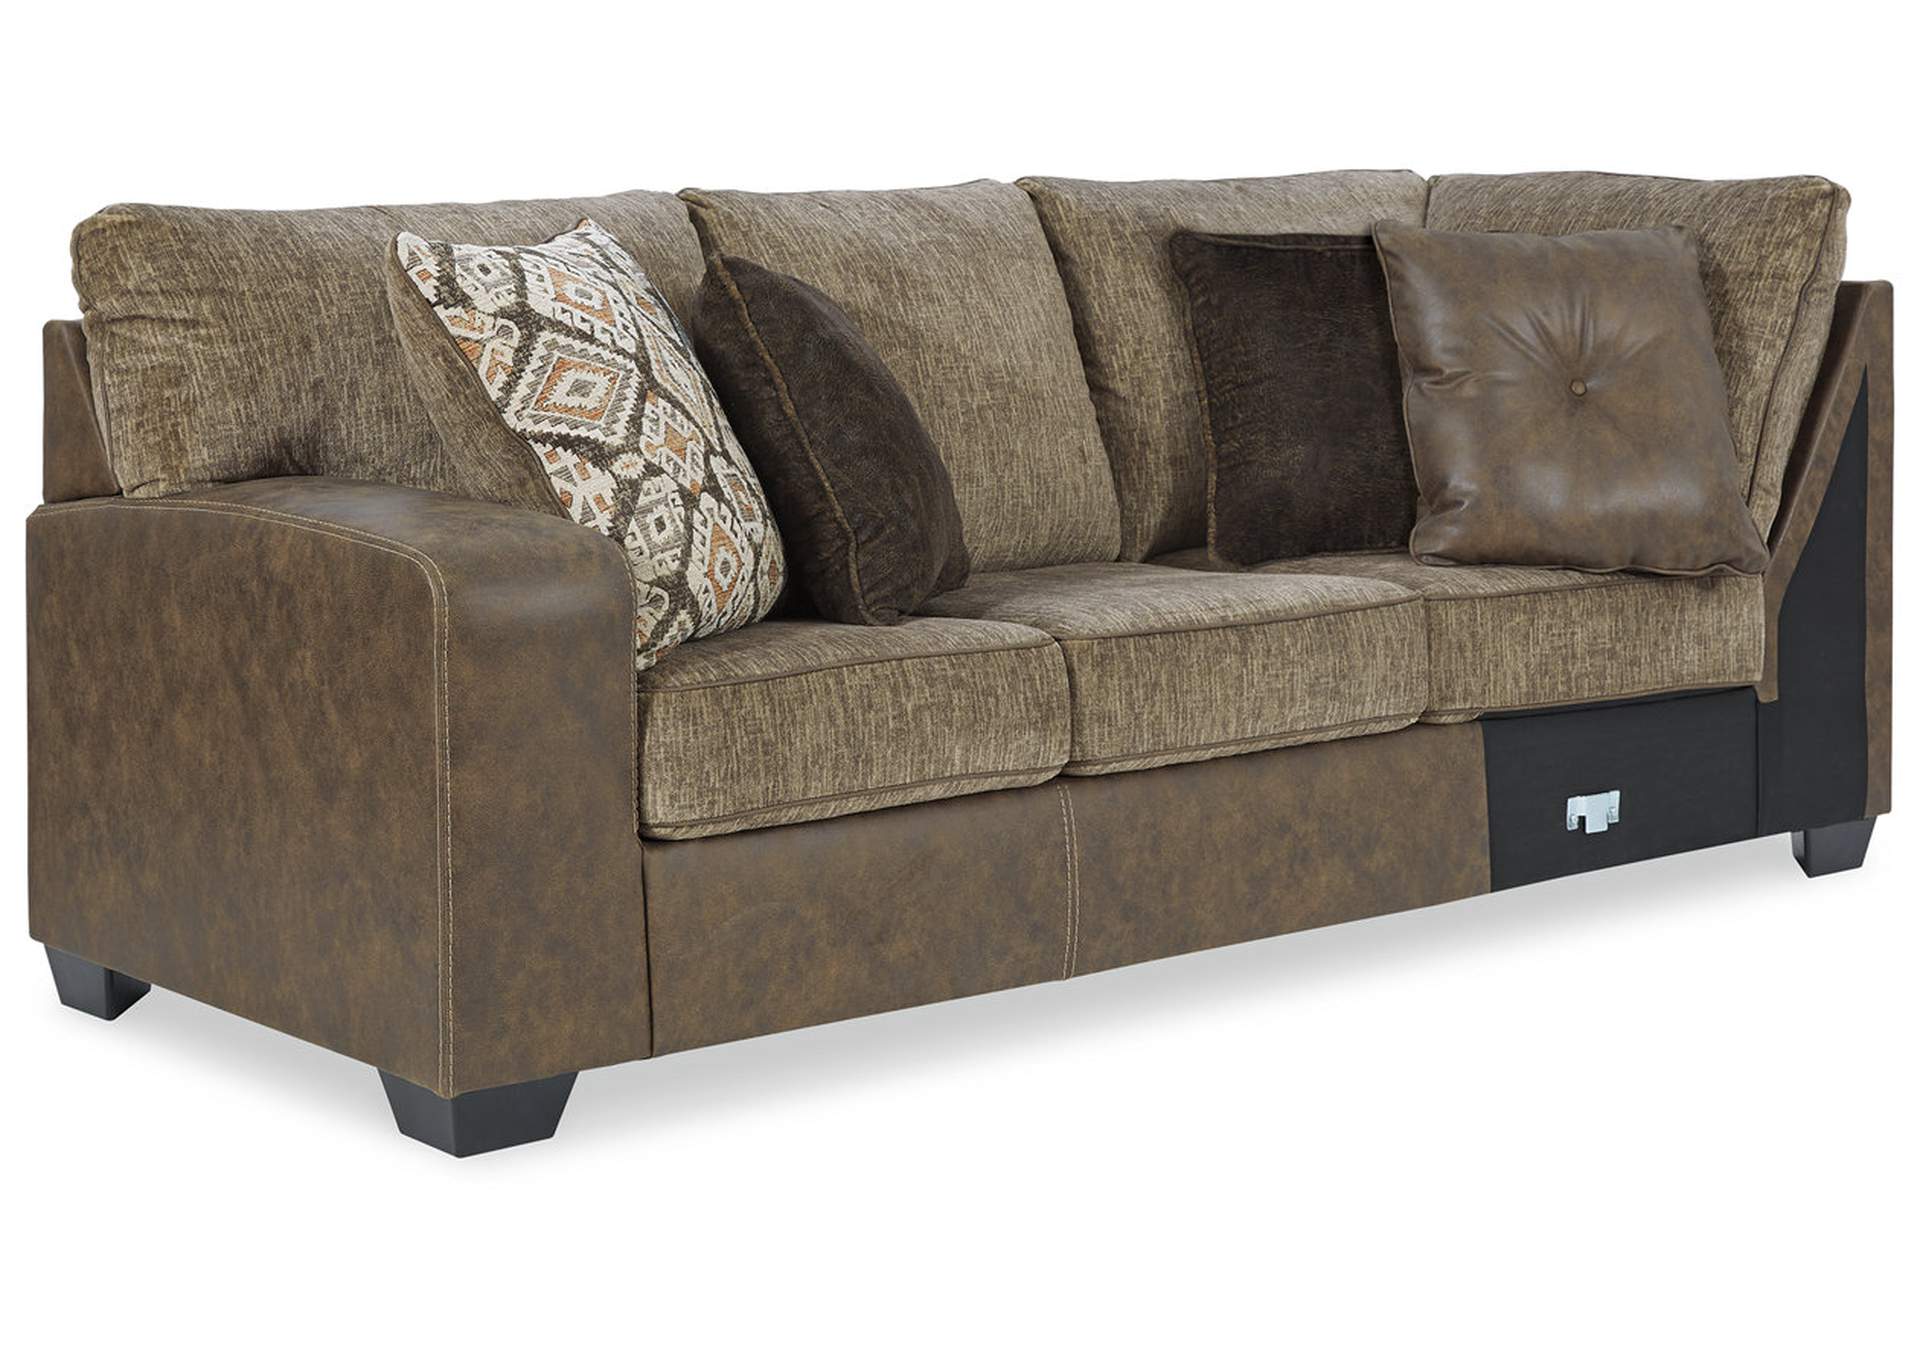 Abalone 3-Piece Sectional with Chair,Benchcraft